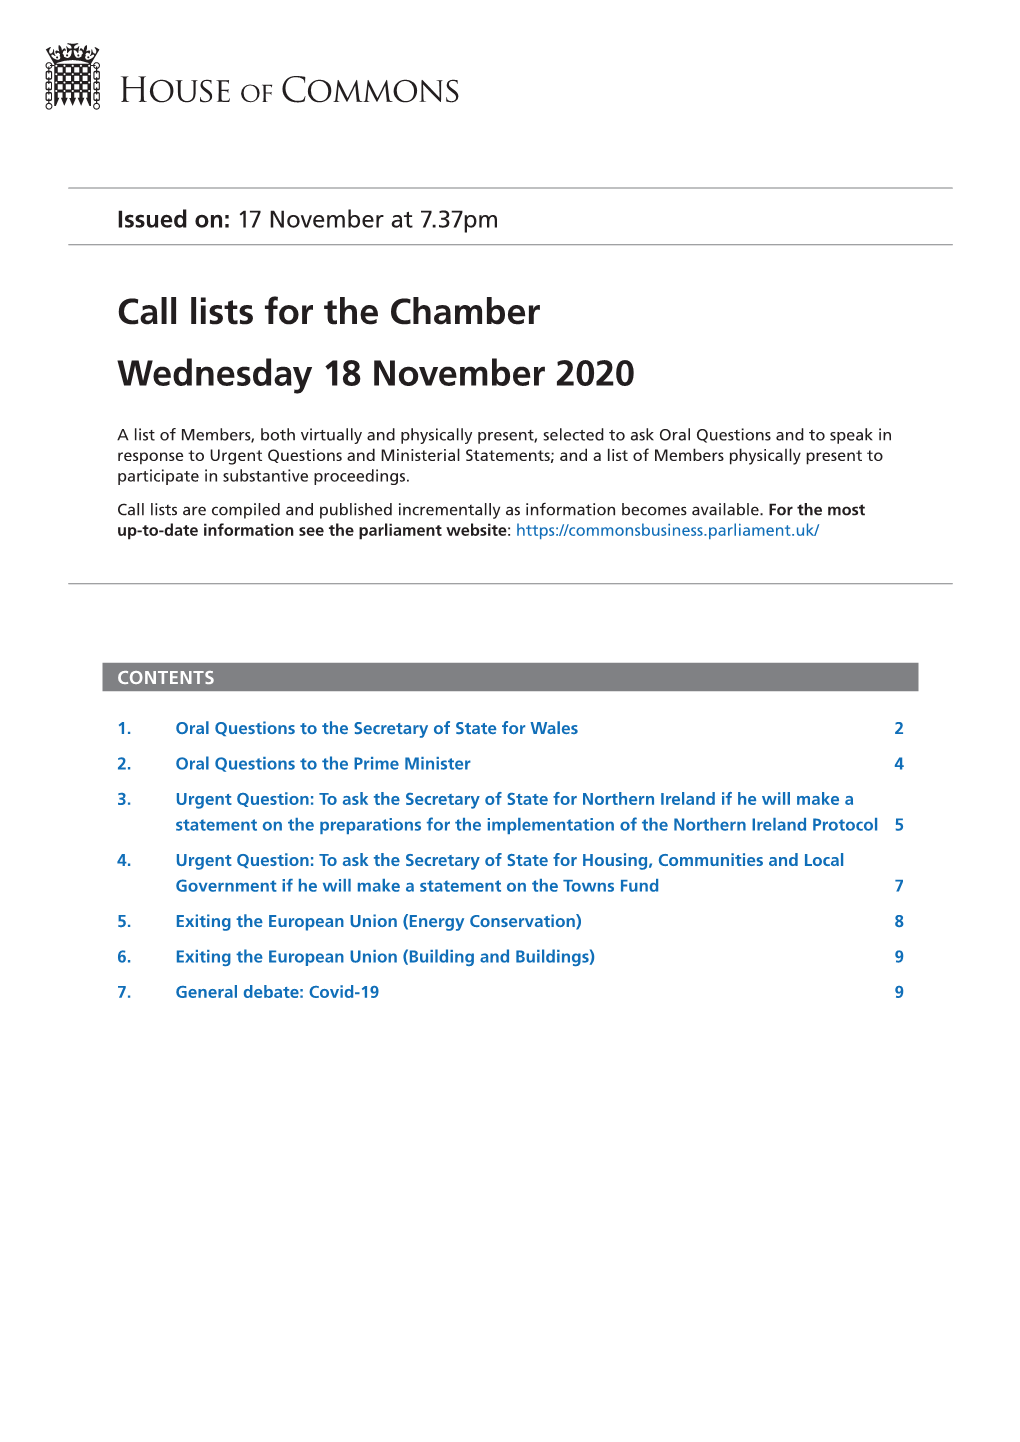 Call Lists for the Chamber Wednesday 18 November 2020